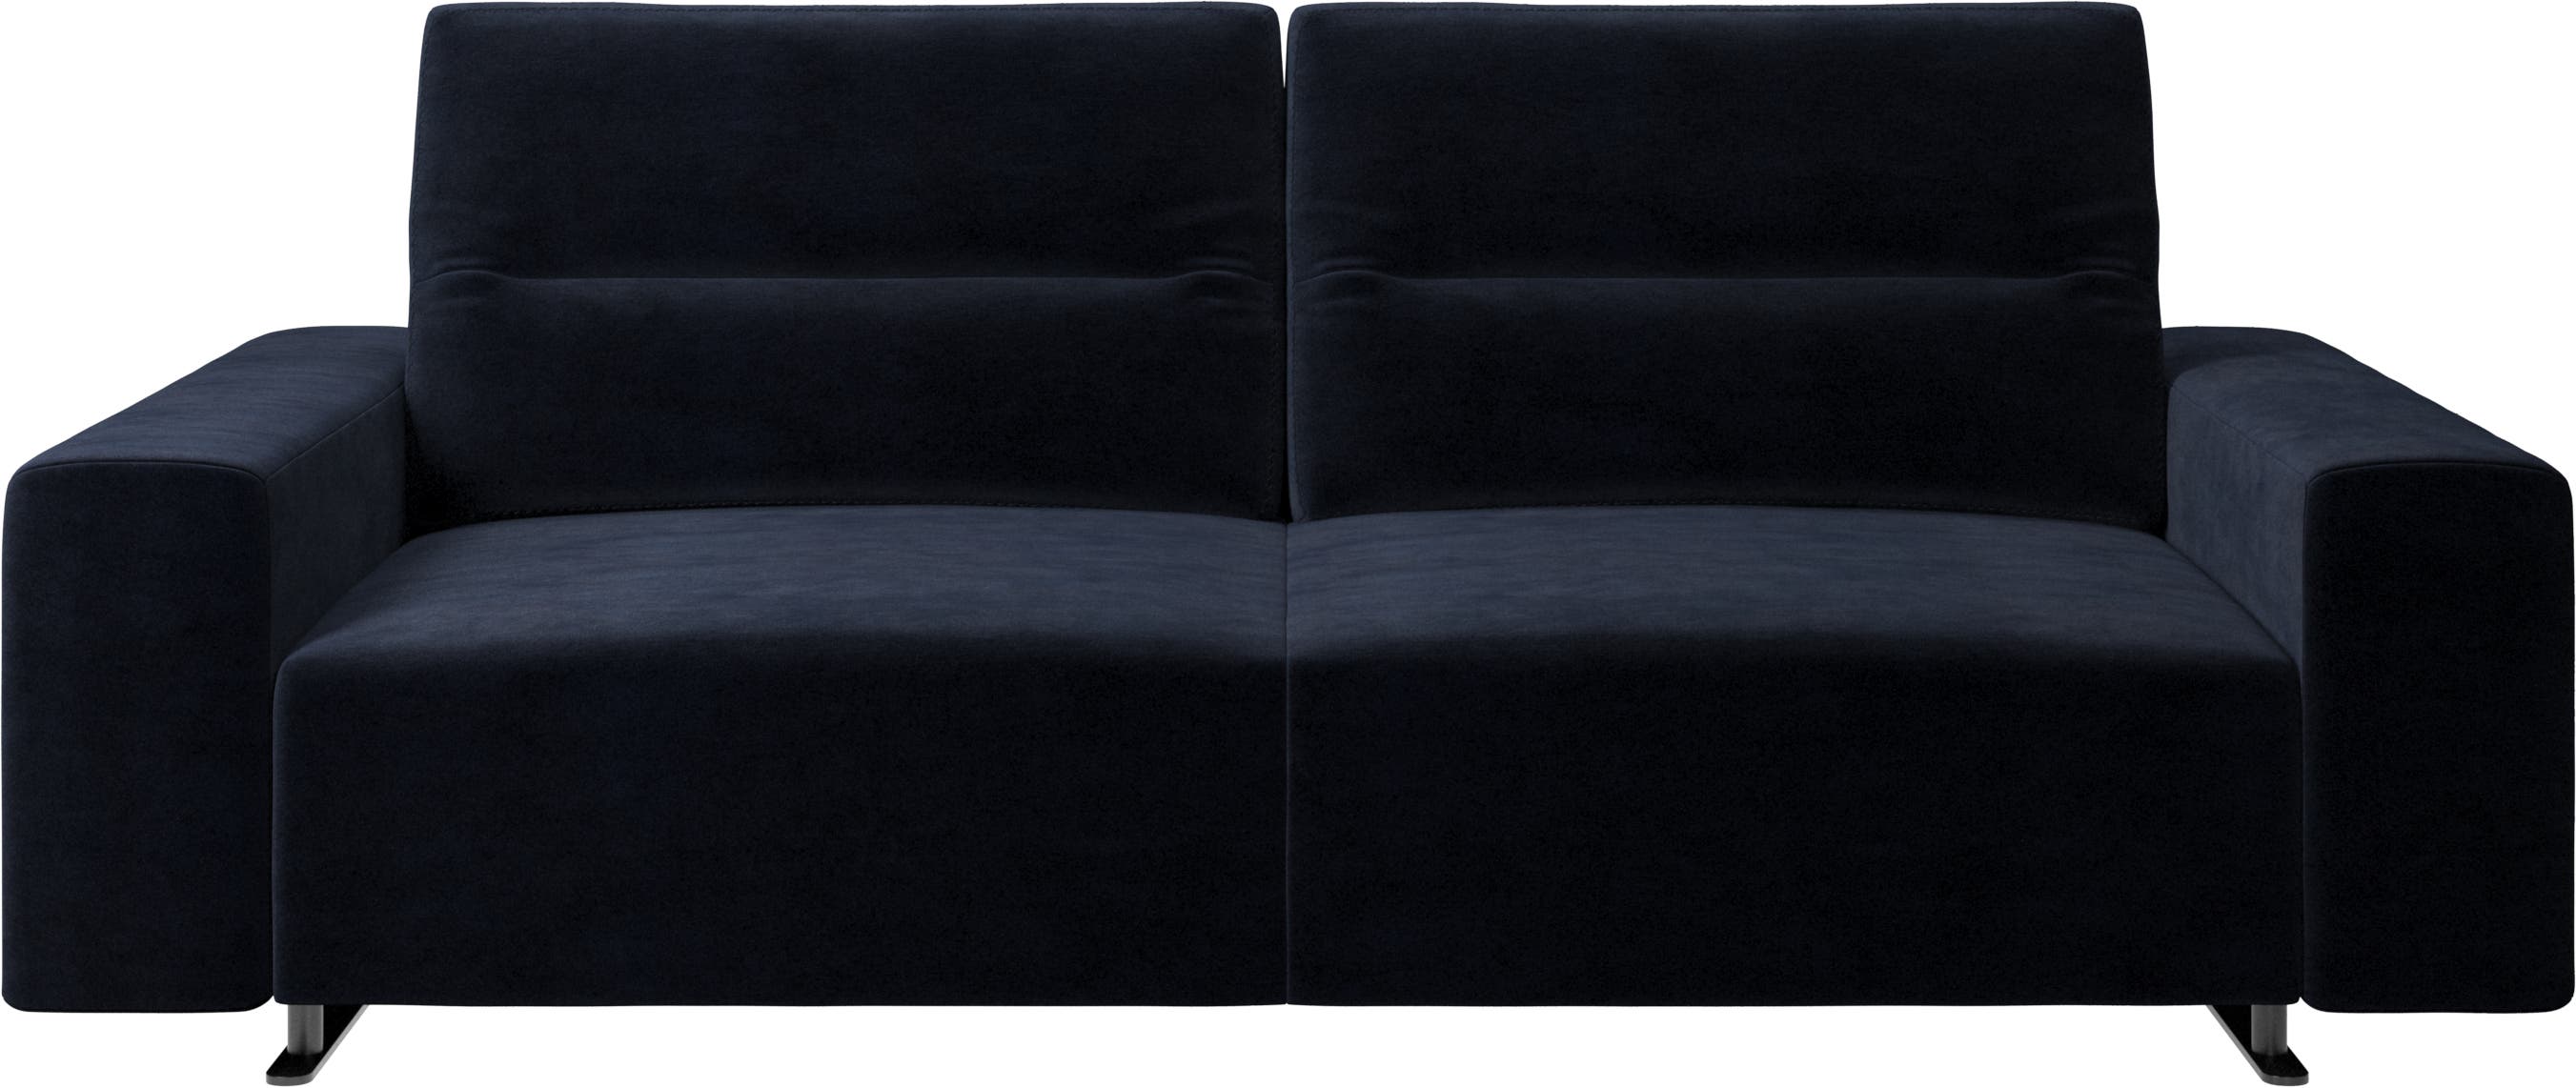 Hampton sofa with adjustable back and storage on the right side